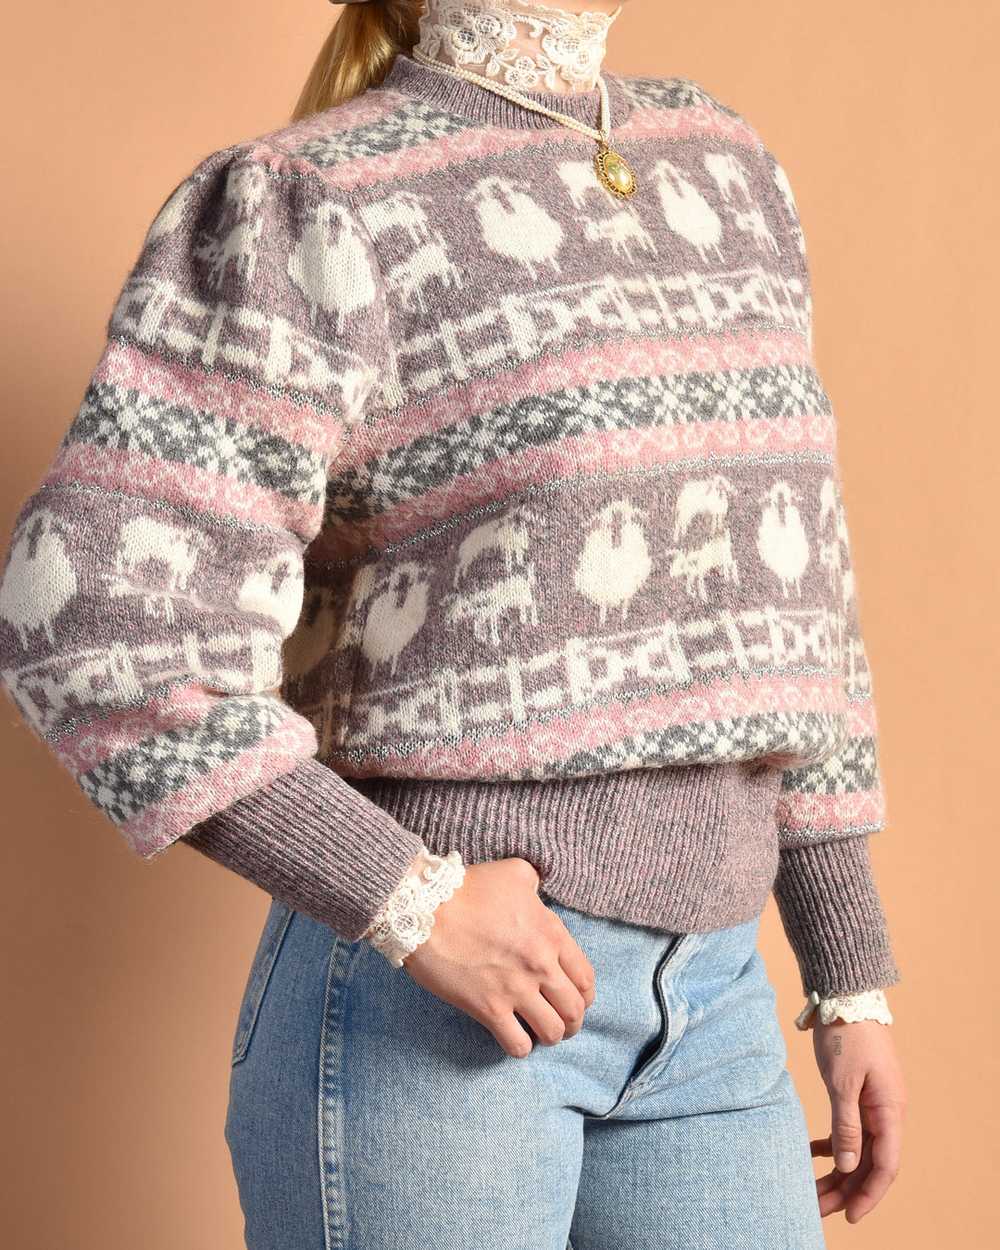 Dorian 1980s Sparkly Wool Sheep Sweater - image 4